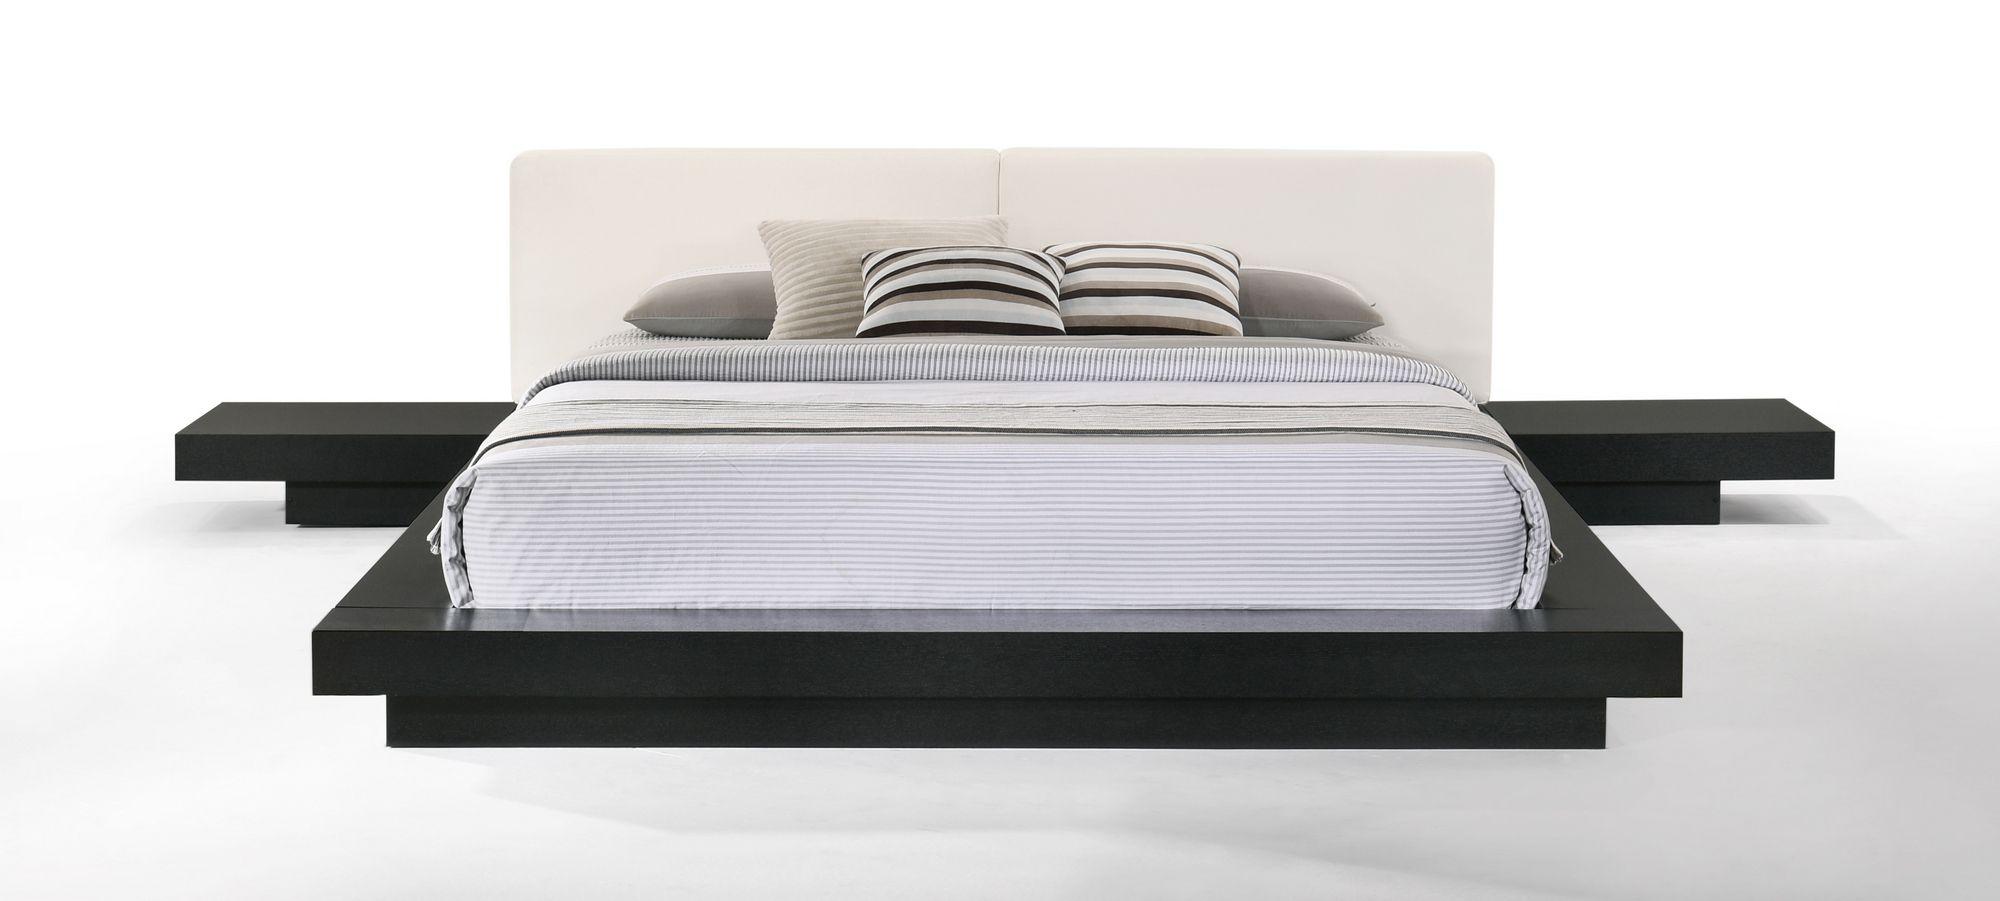 Contemporary, Modern Platform Bed Tokyo VGMABR-90-BLK-WHT in White, Black Leatherette